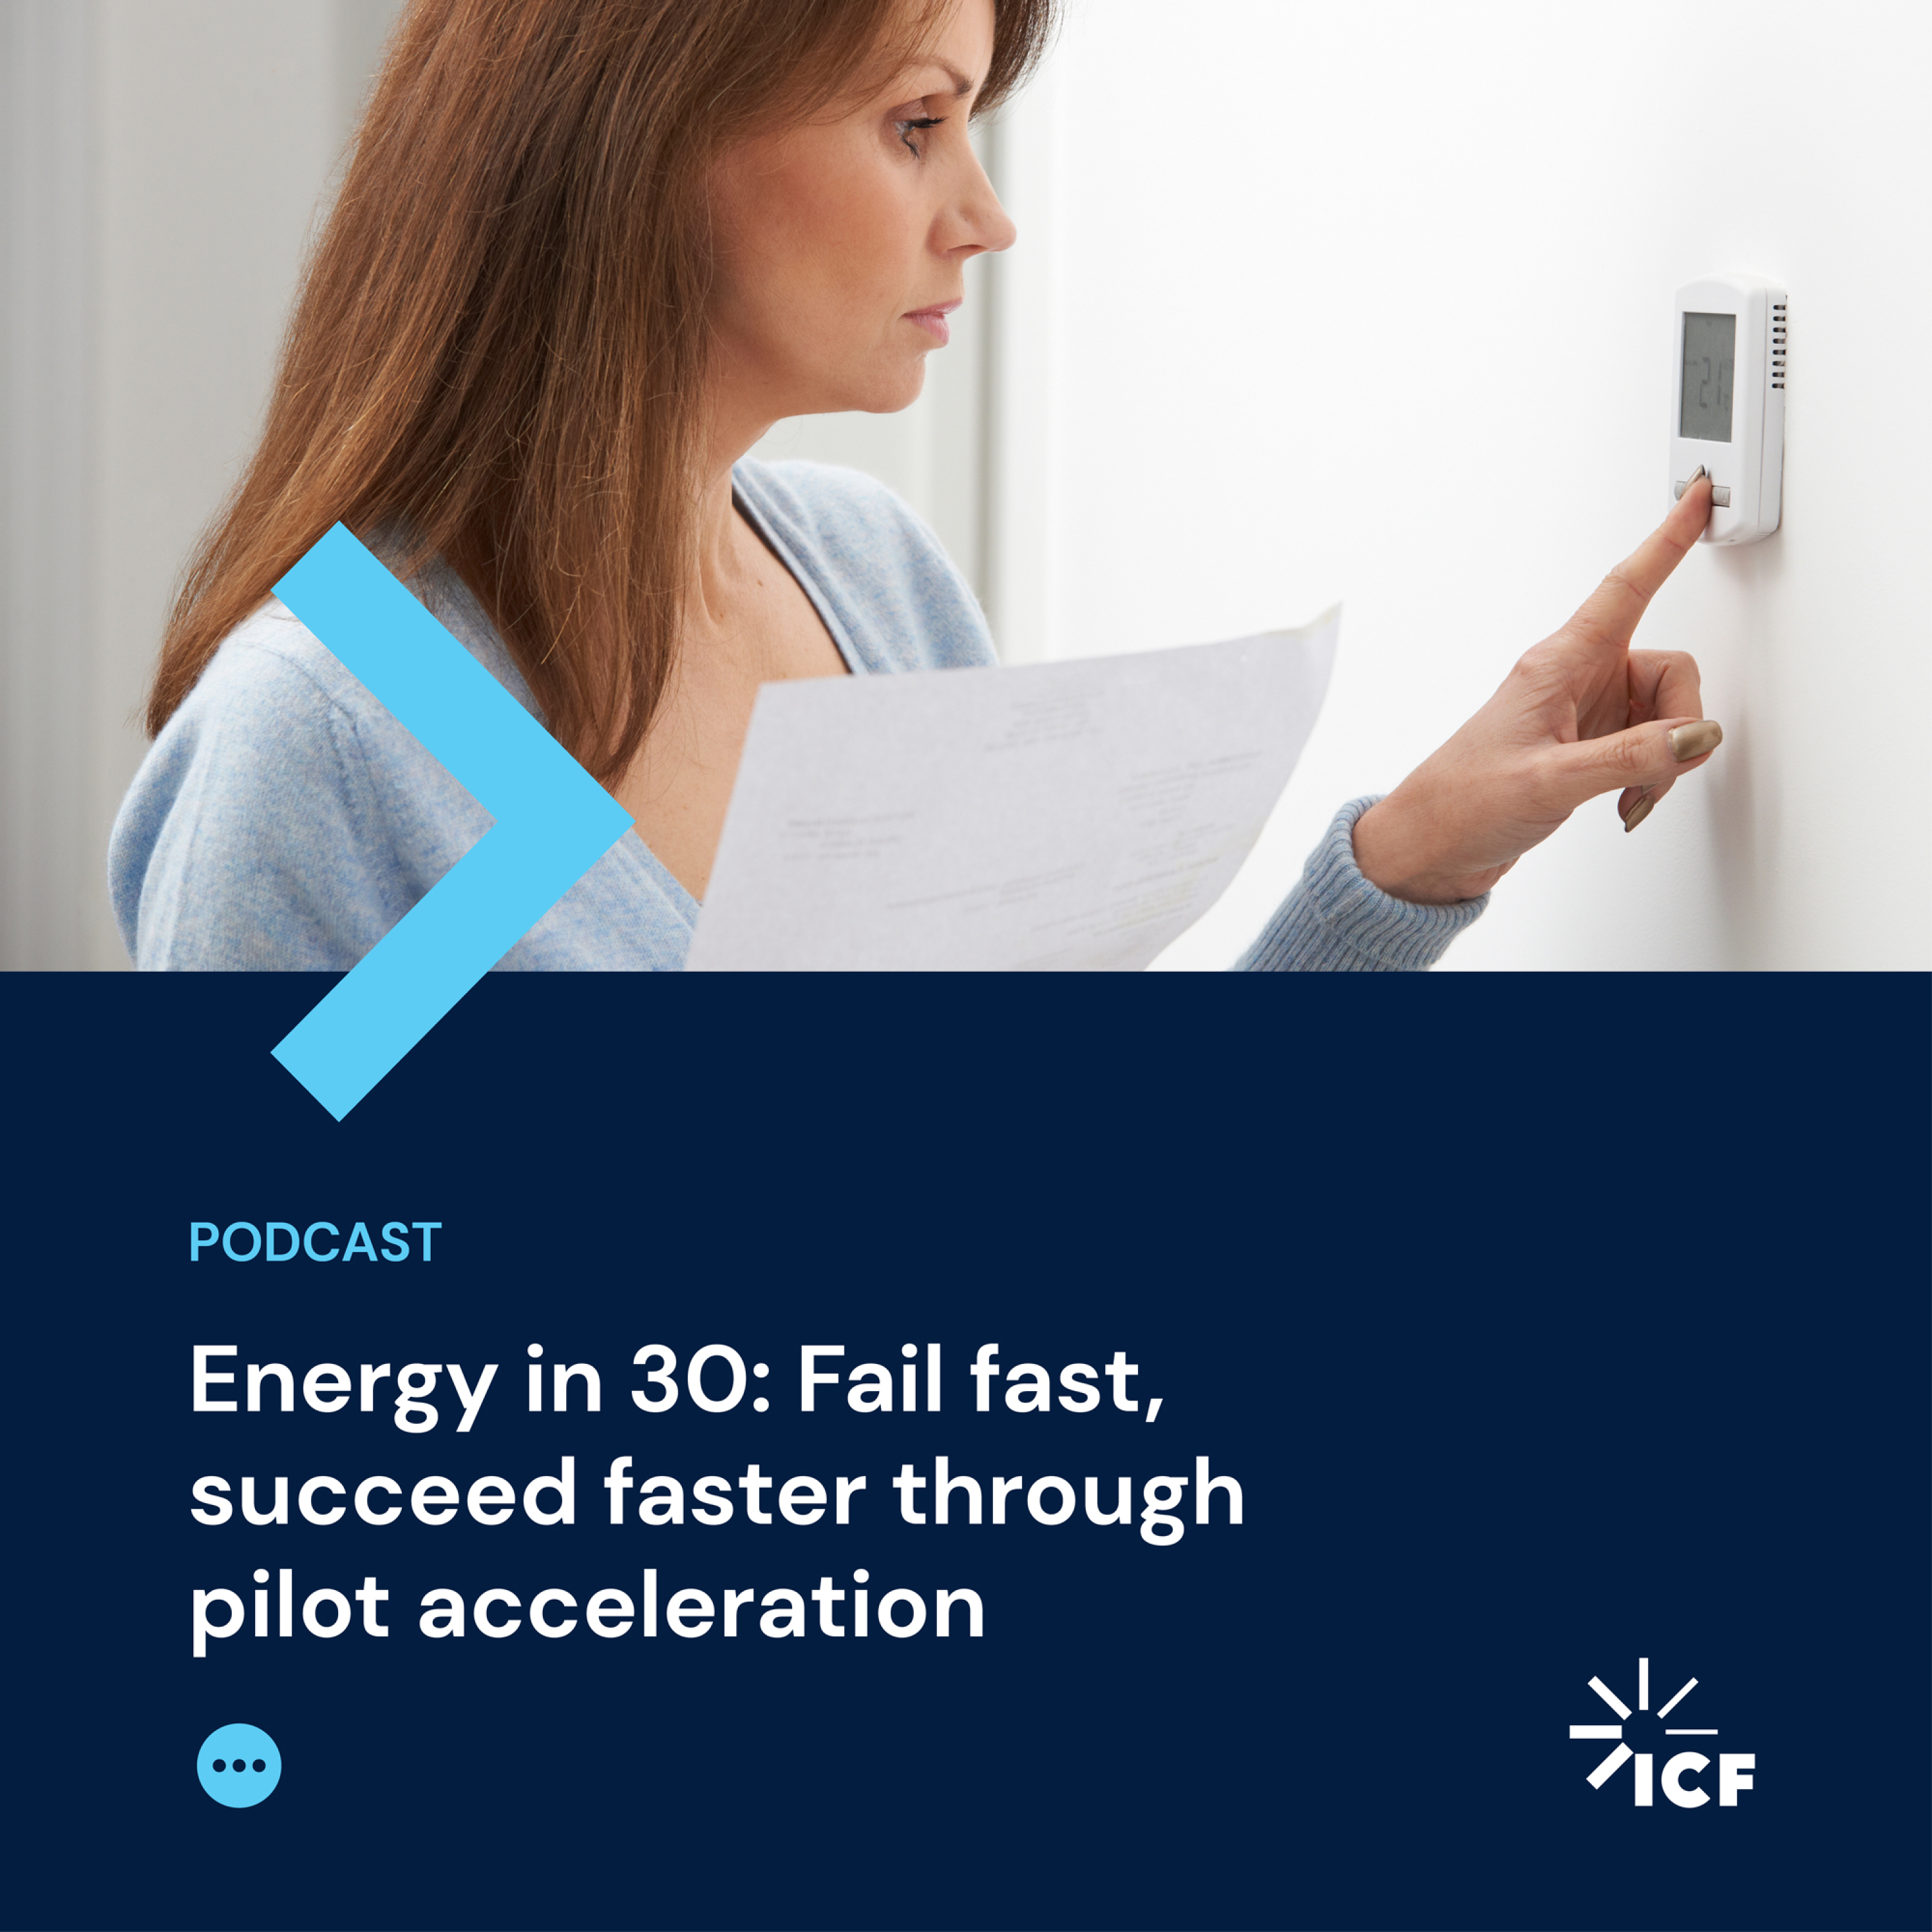 Energy in 30 #1: Fail fast, succeed faster through pilot acceleration